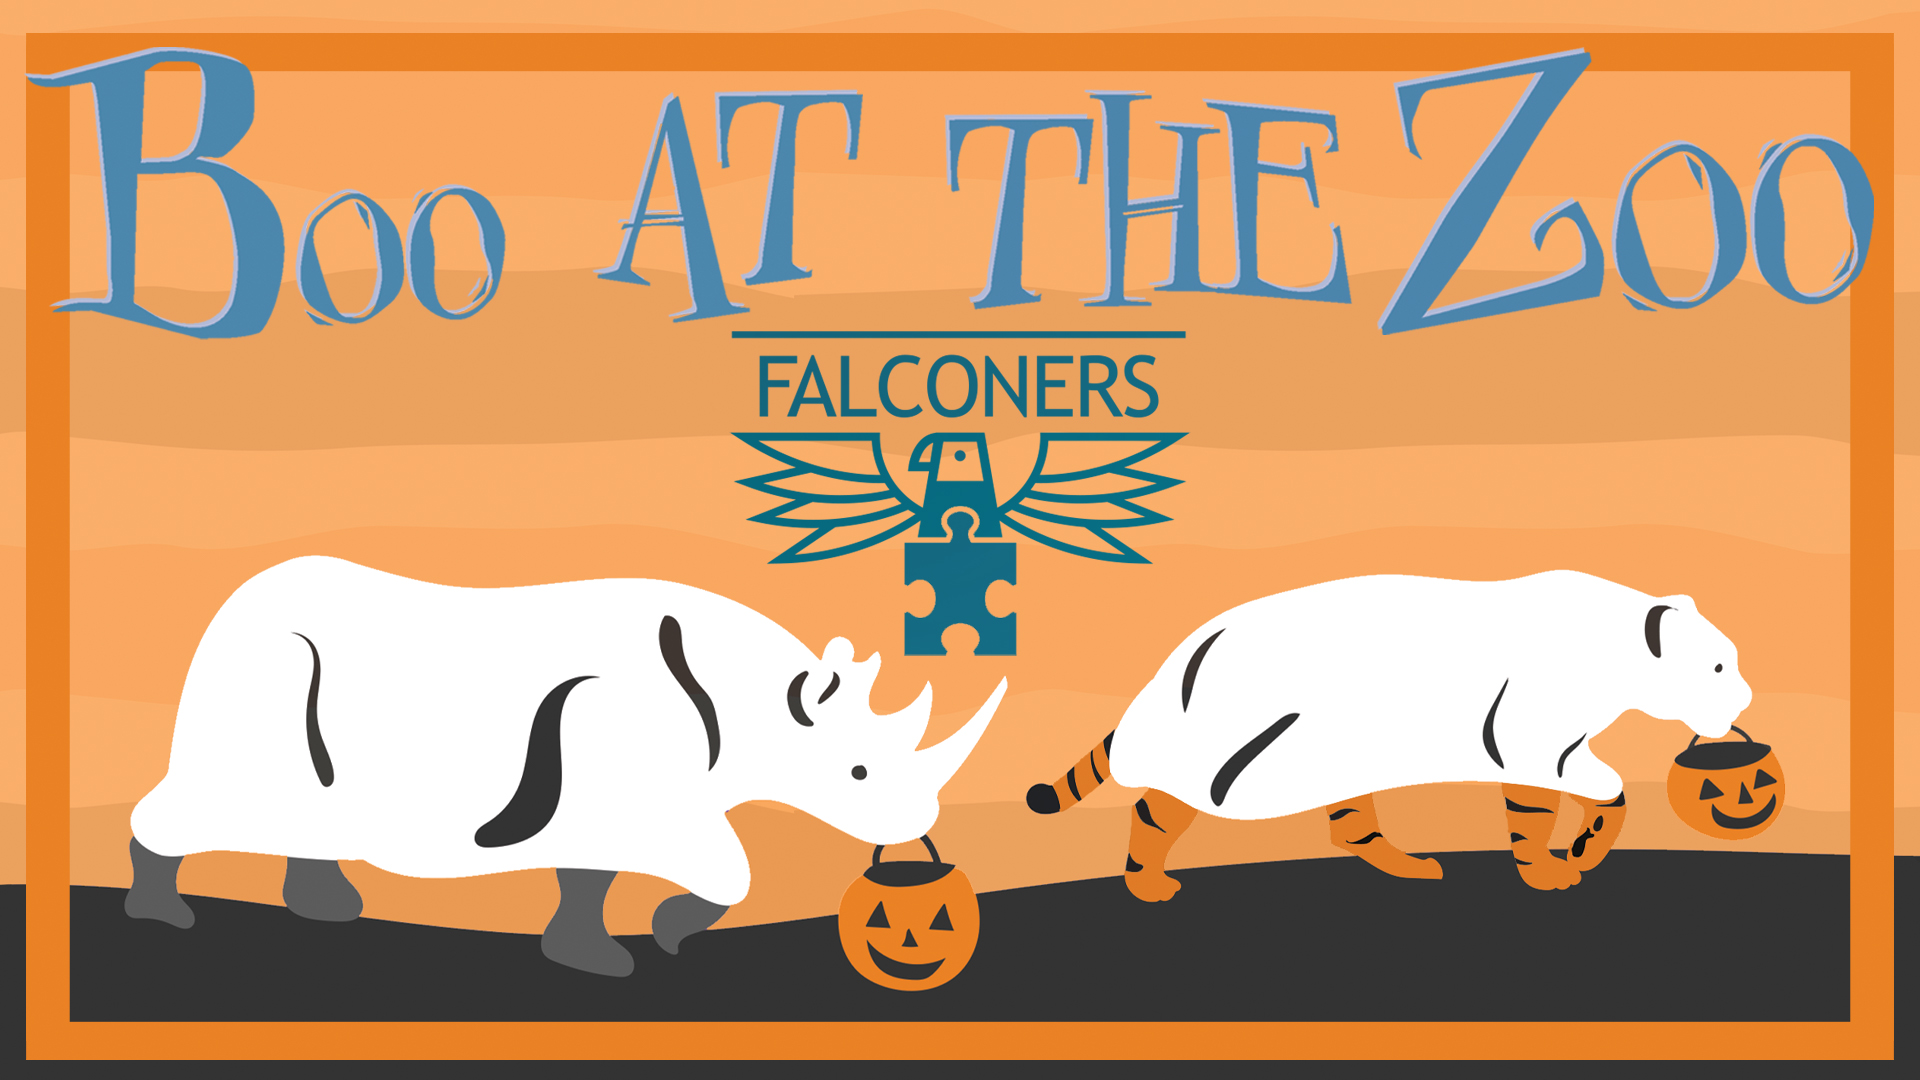 Boo at the Zoo Falconers banner